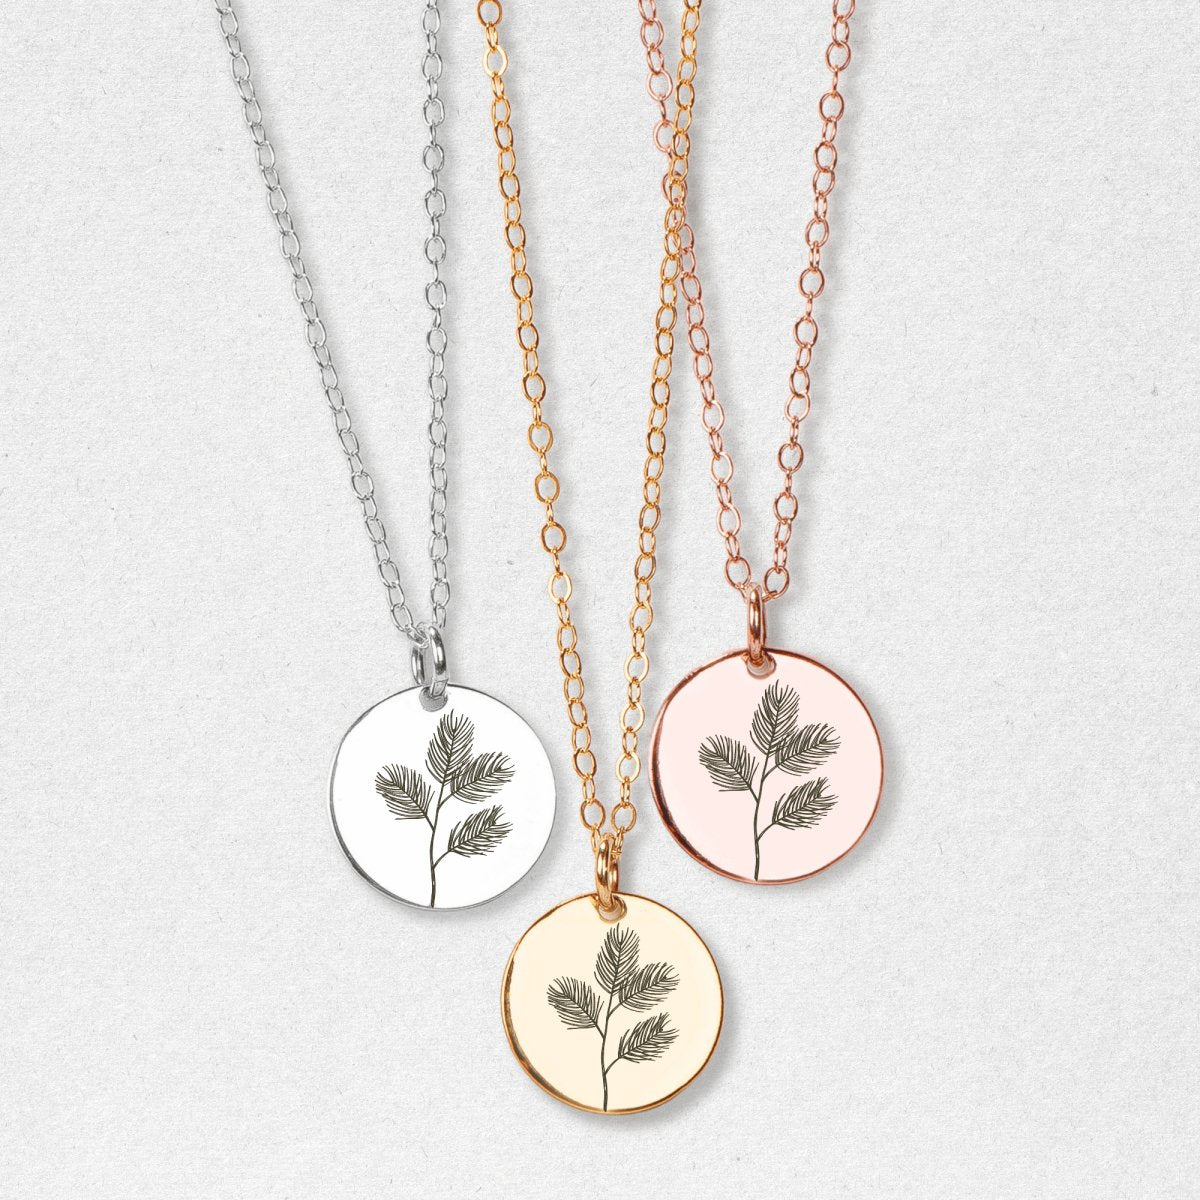 Pine Branch Disc Necklace - Melanie Golden Jewelry - disc necklaces, Engraved Jewelry, flora, minimal minimal necklace, minimal necklace, necklace, necklaces, symbolic